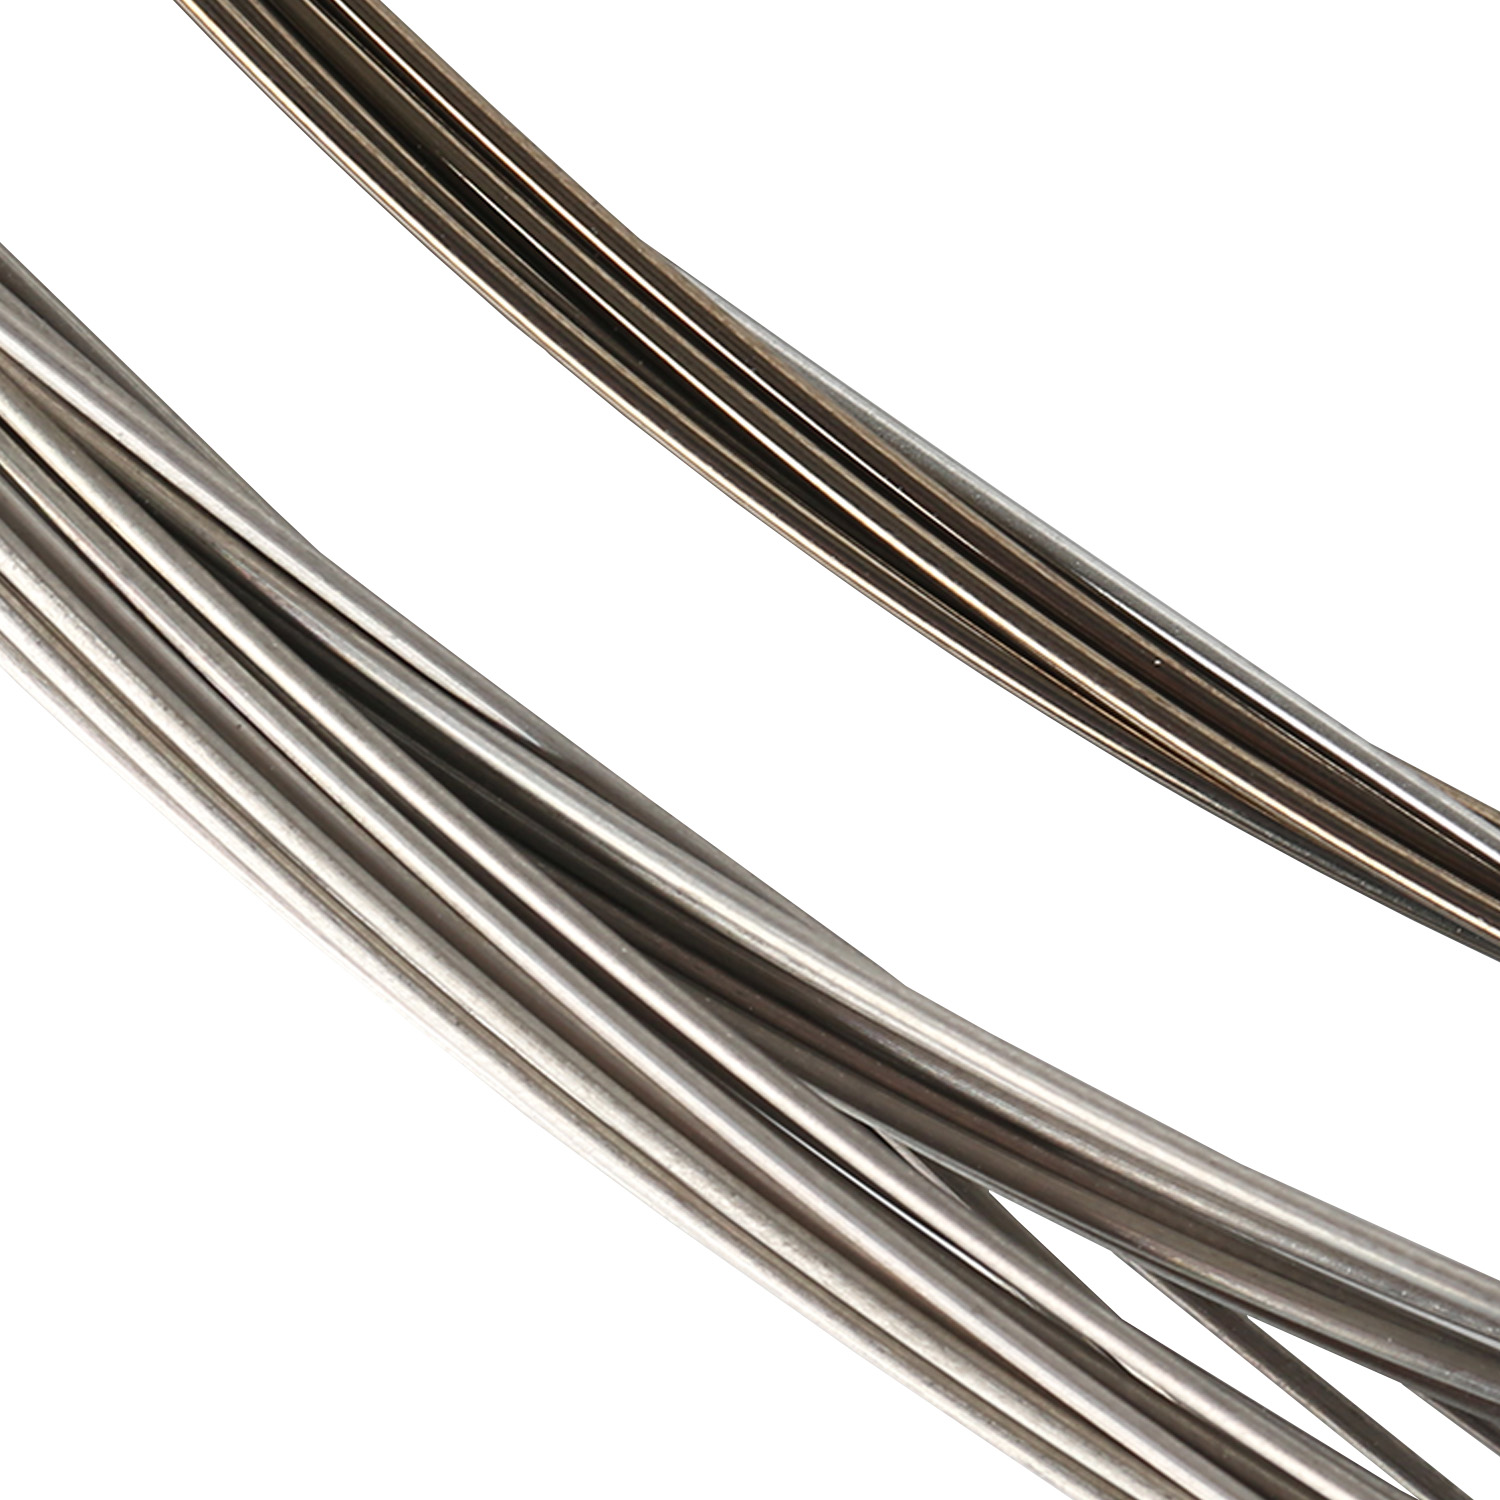 Medical core wire